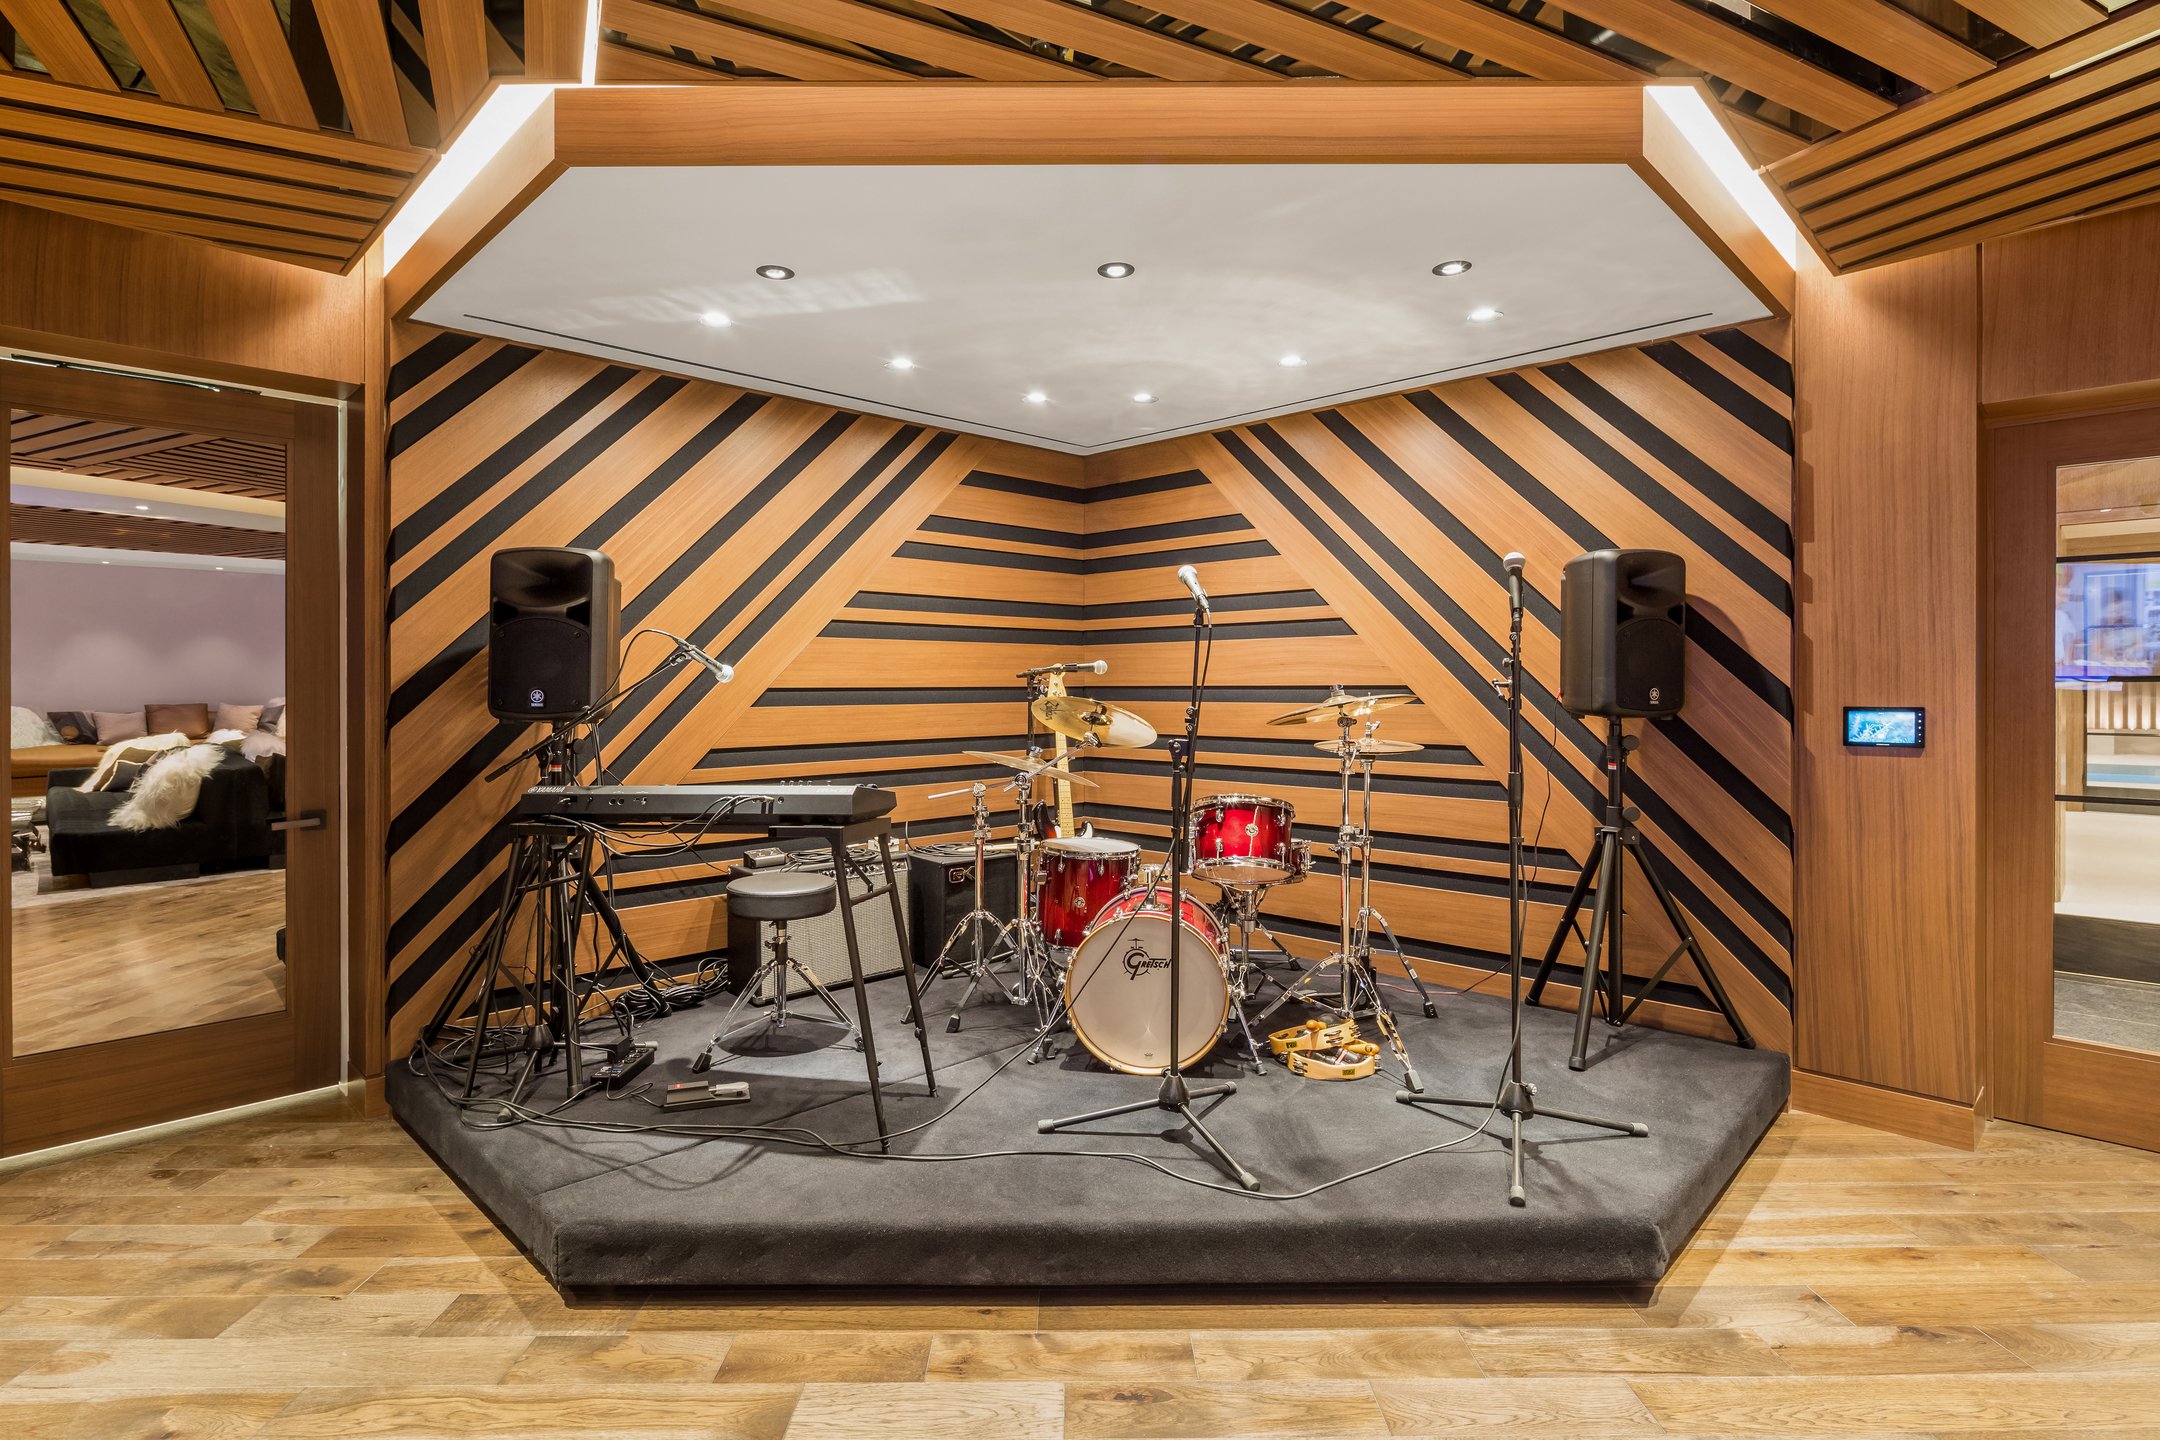 Music room at The Kent luxury condos in New York City. Small stage with instruments and wood backdrop with black lines.